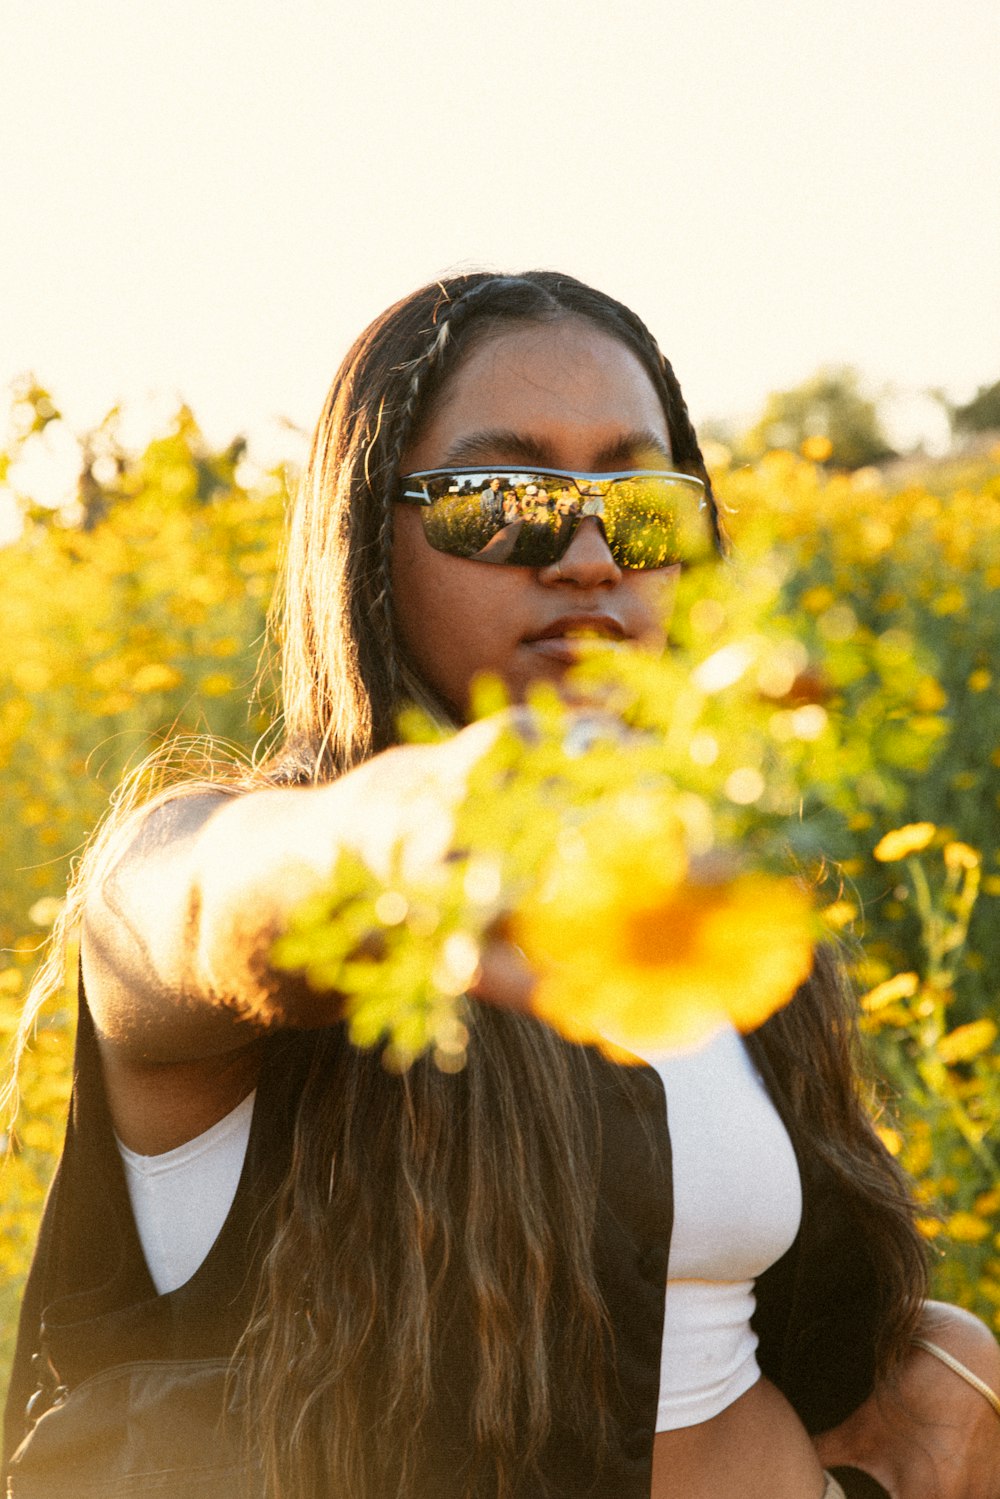 a woman wearing sunglasses standing in a field of flowers